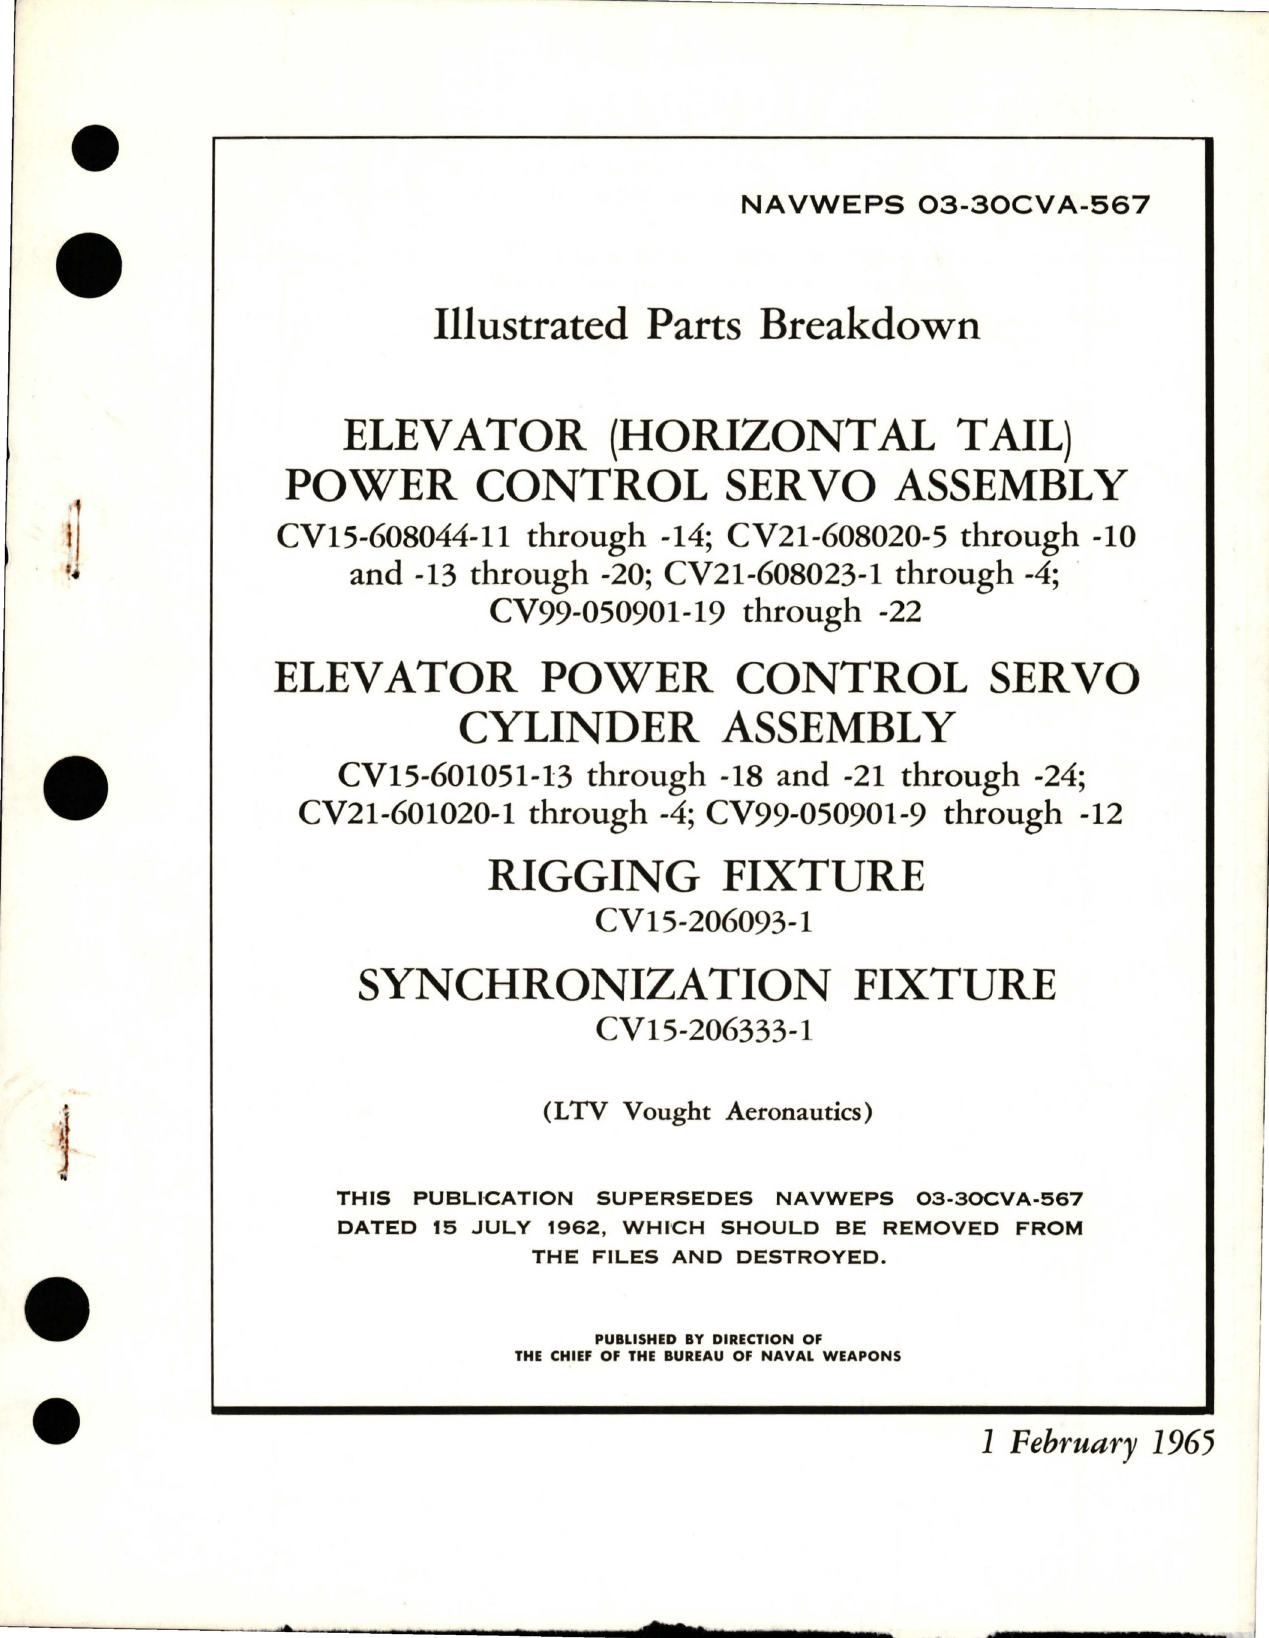 Sample page 1 from AirCorps Library document: Illustrated Parts Breakdown for Elevator (Horizontal Tail) Power Control Servo and Cylinder Assembly, Rigging and Synchronization Fixture